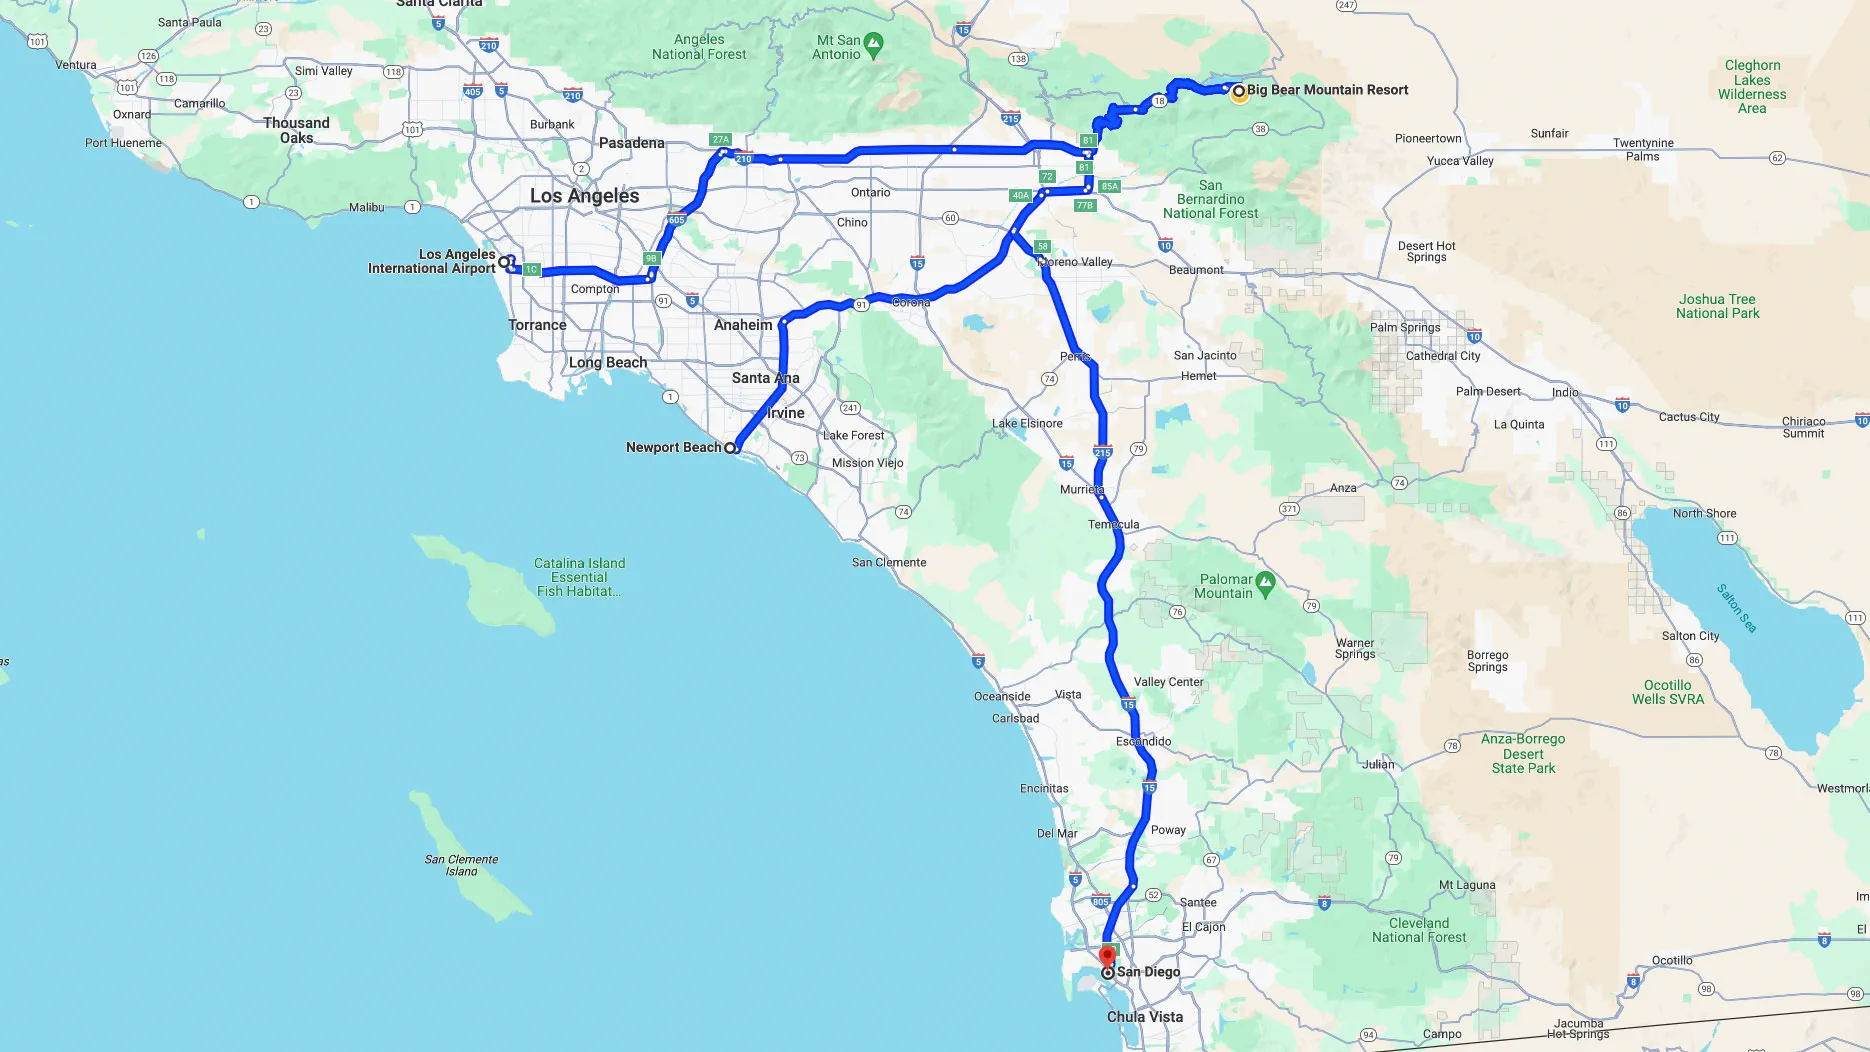 Google maps from LA, OC, and SD to BBMR